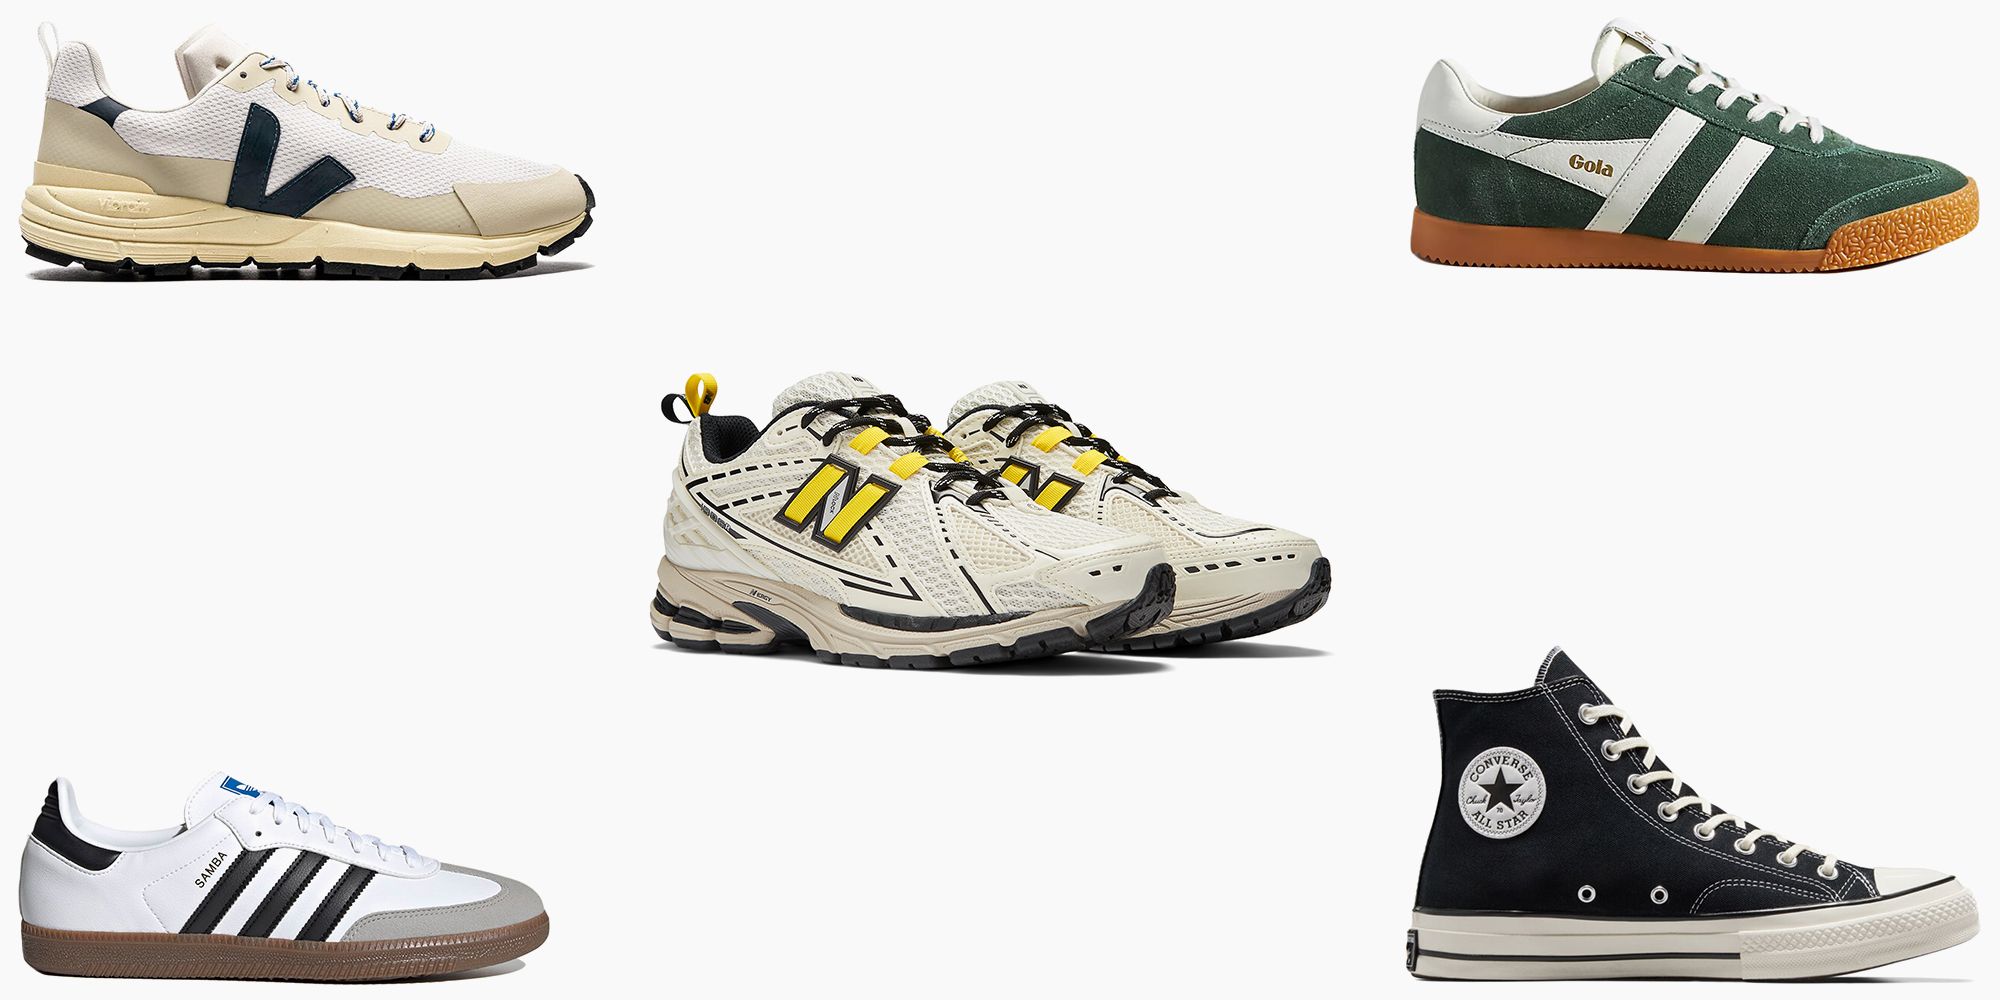 Coolest Retro Sneakers To Get Now - Cool Retro-Inspired Sneakers for Men